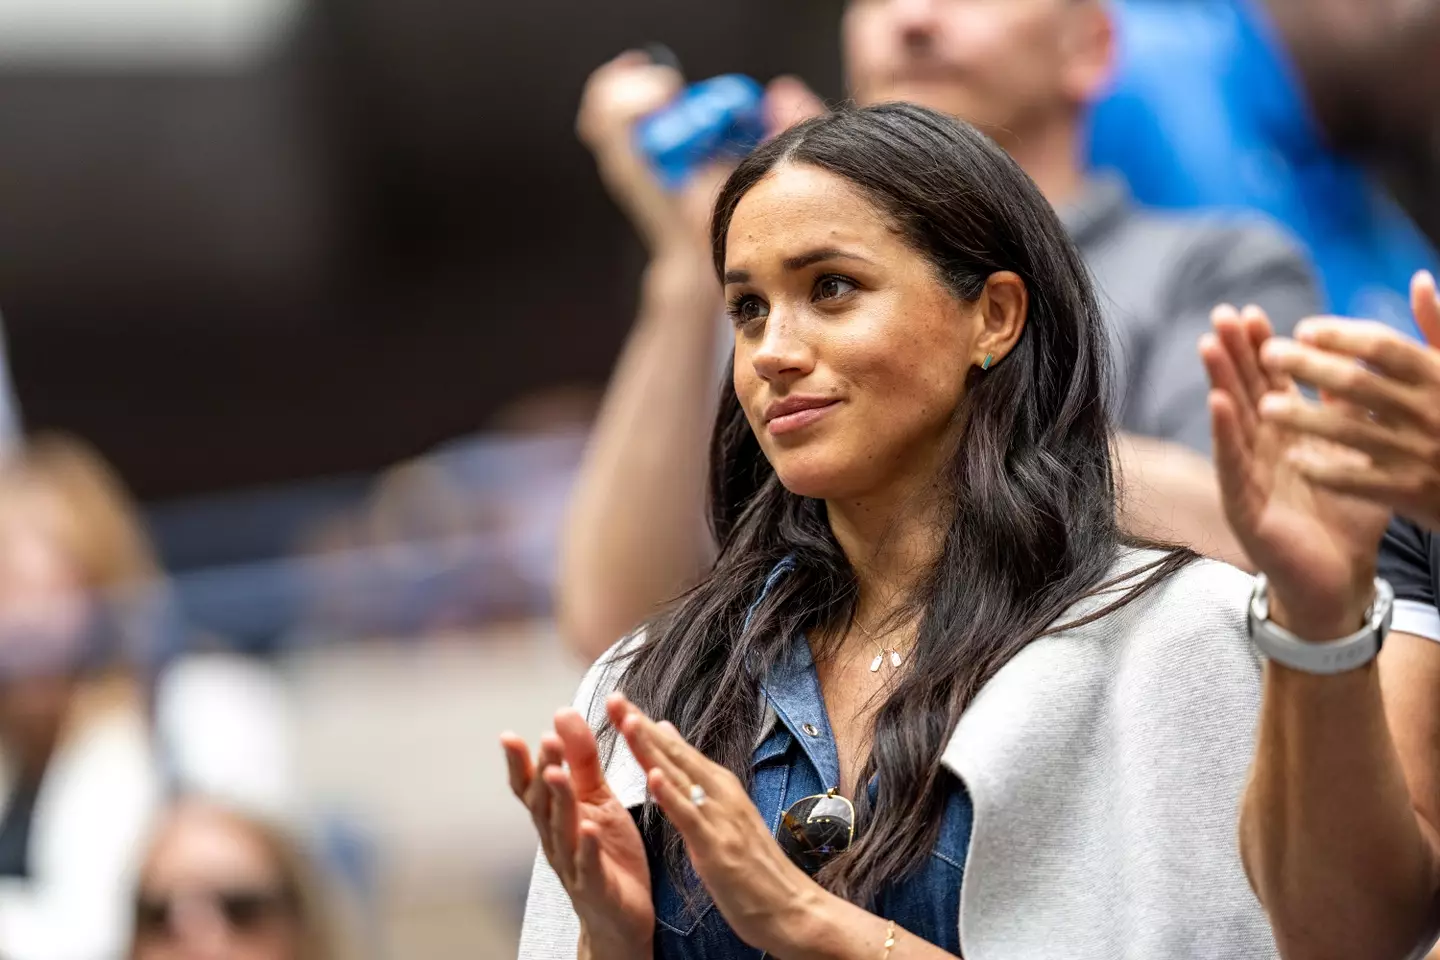 Meghan Markle said she felt 'objectified' while working on Deal Or No Deal.